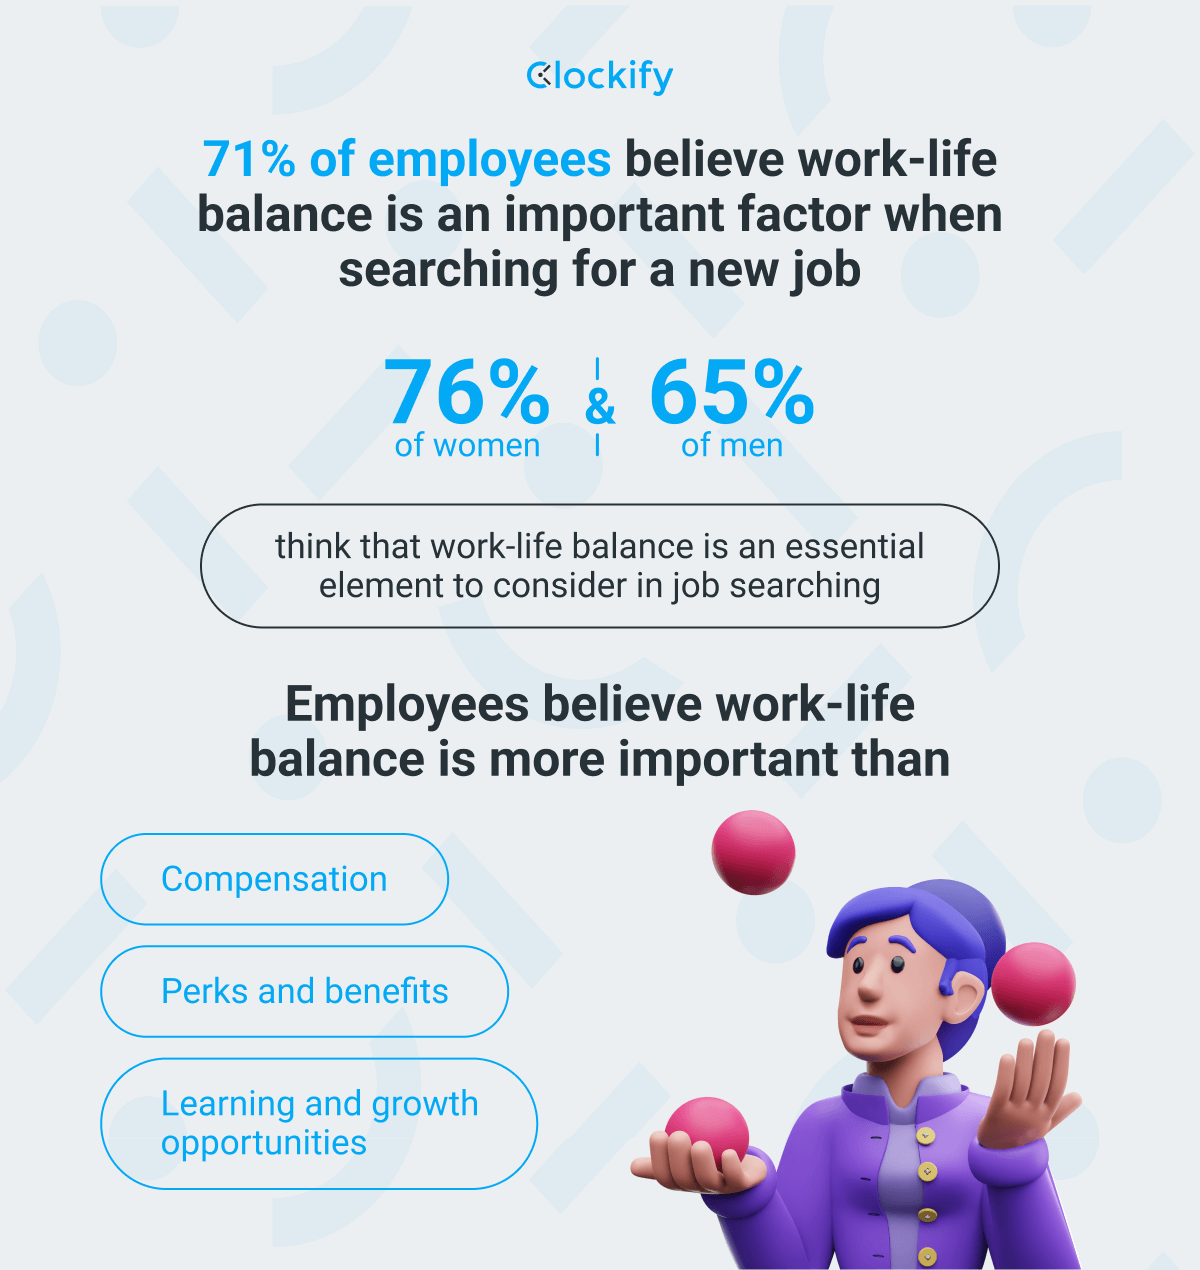 71% of employees work-life balance is important when searching for a new job. Employees believe work-life balance is more important than compensation, benefits, and growth opportunities.